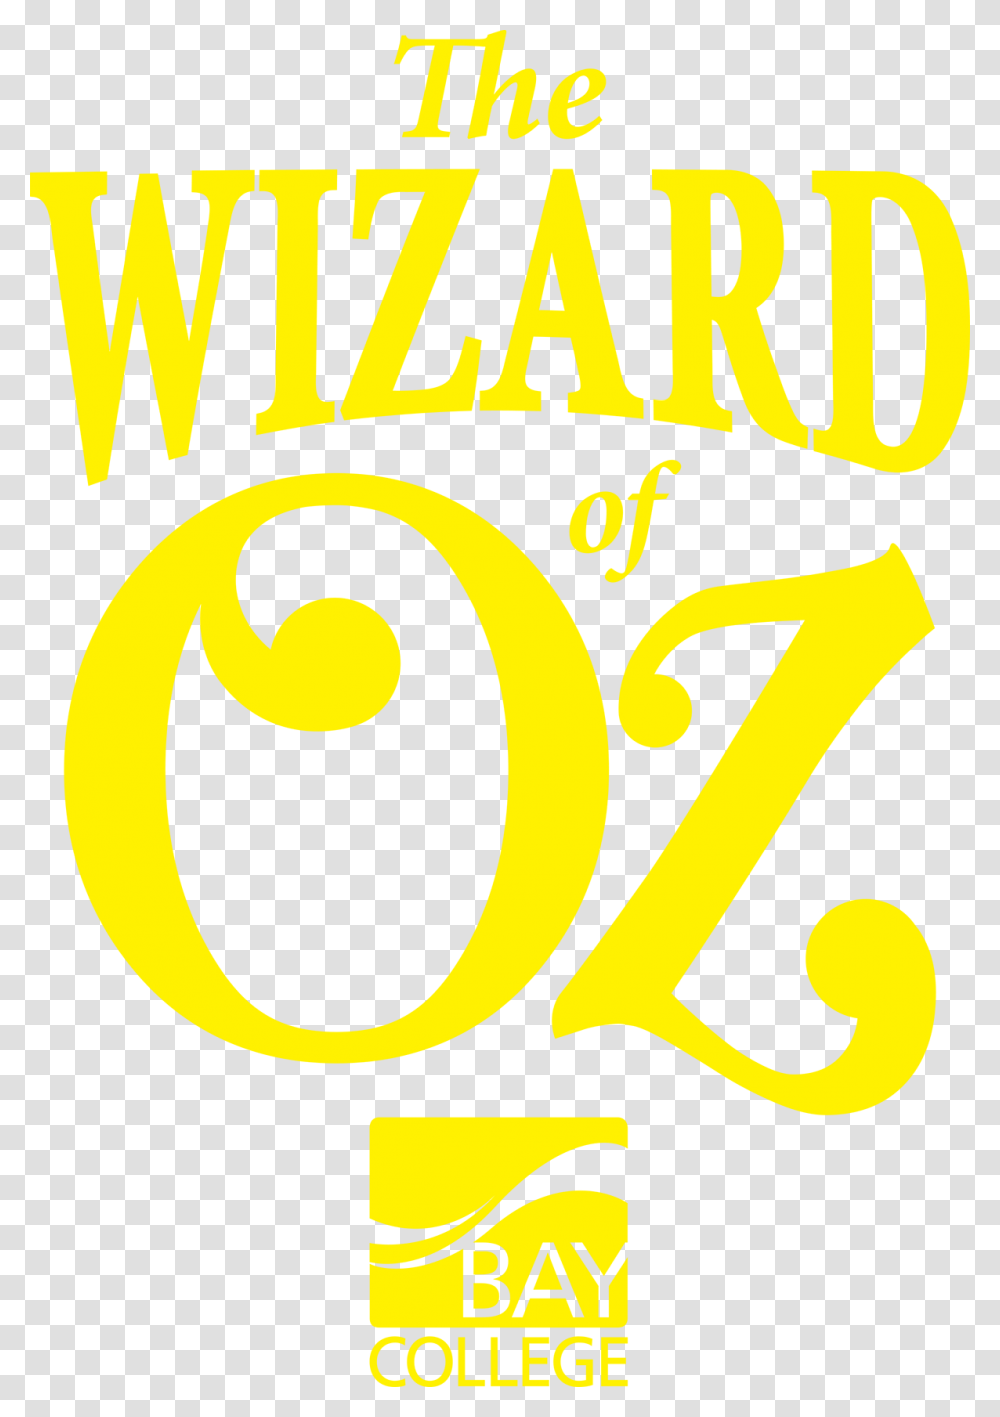 Download Poster Wizard Of Oz Bay College, Logo, Trademark Transparent Png